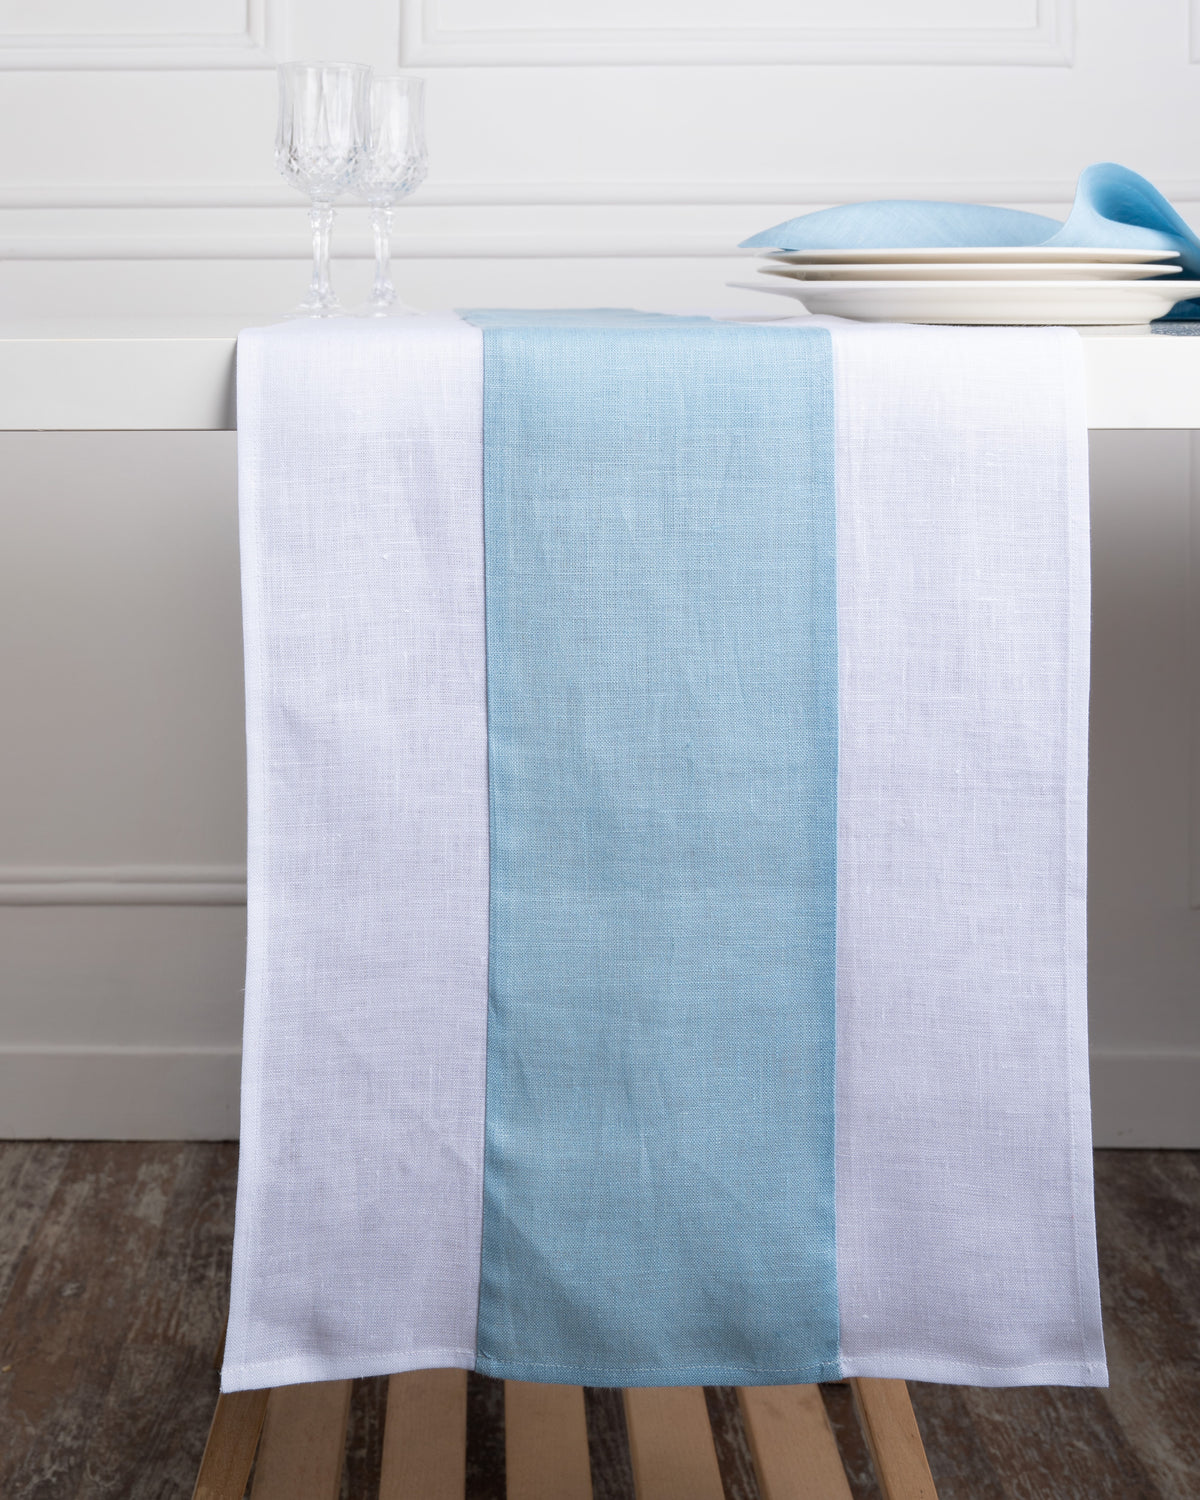 White and Powder Blue Linen Table Runner - Splicing